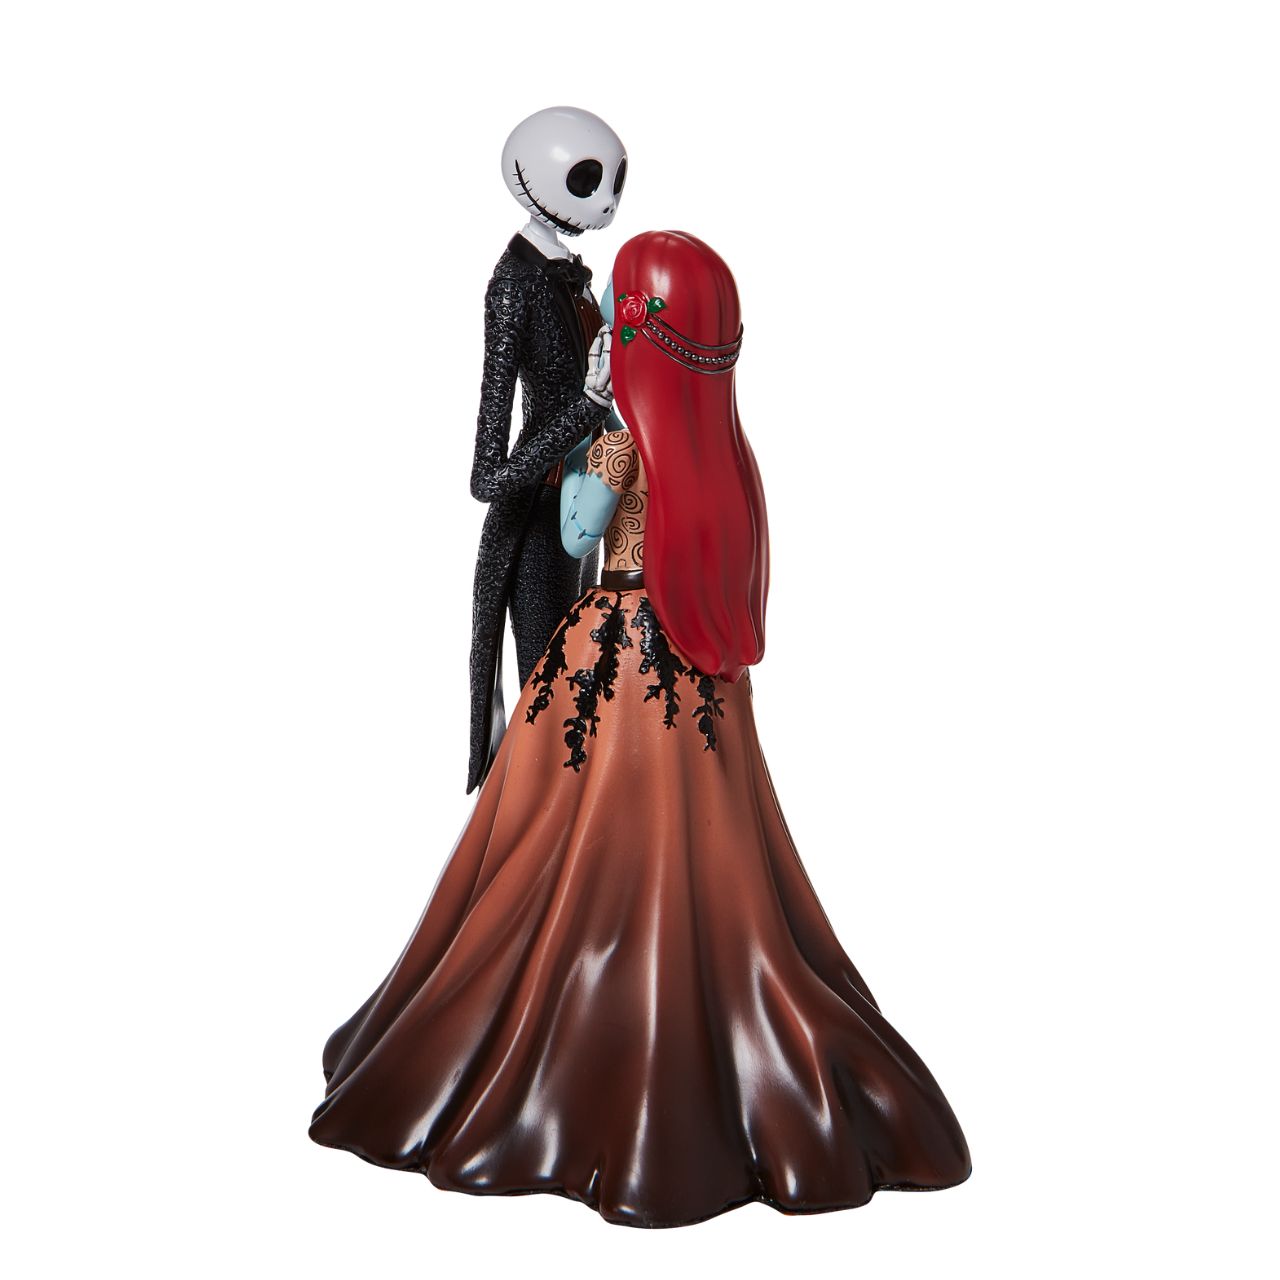 Disney Showcase Jack and Sally Couture de Force Figurine  Jack and Sally are an unlikely coupling of precious proportions. The Skellington king and ragdoll lock eyes in a romantic embrace in this show stopping Couture de Force Disney showcase piece. Wearing elegant robes, the pair prepare to dance the night away.